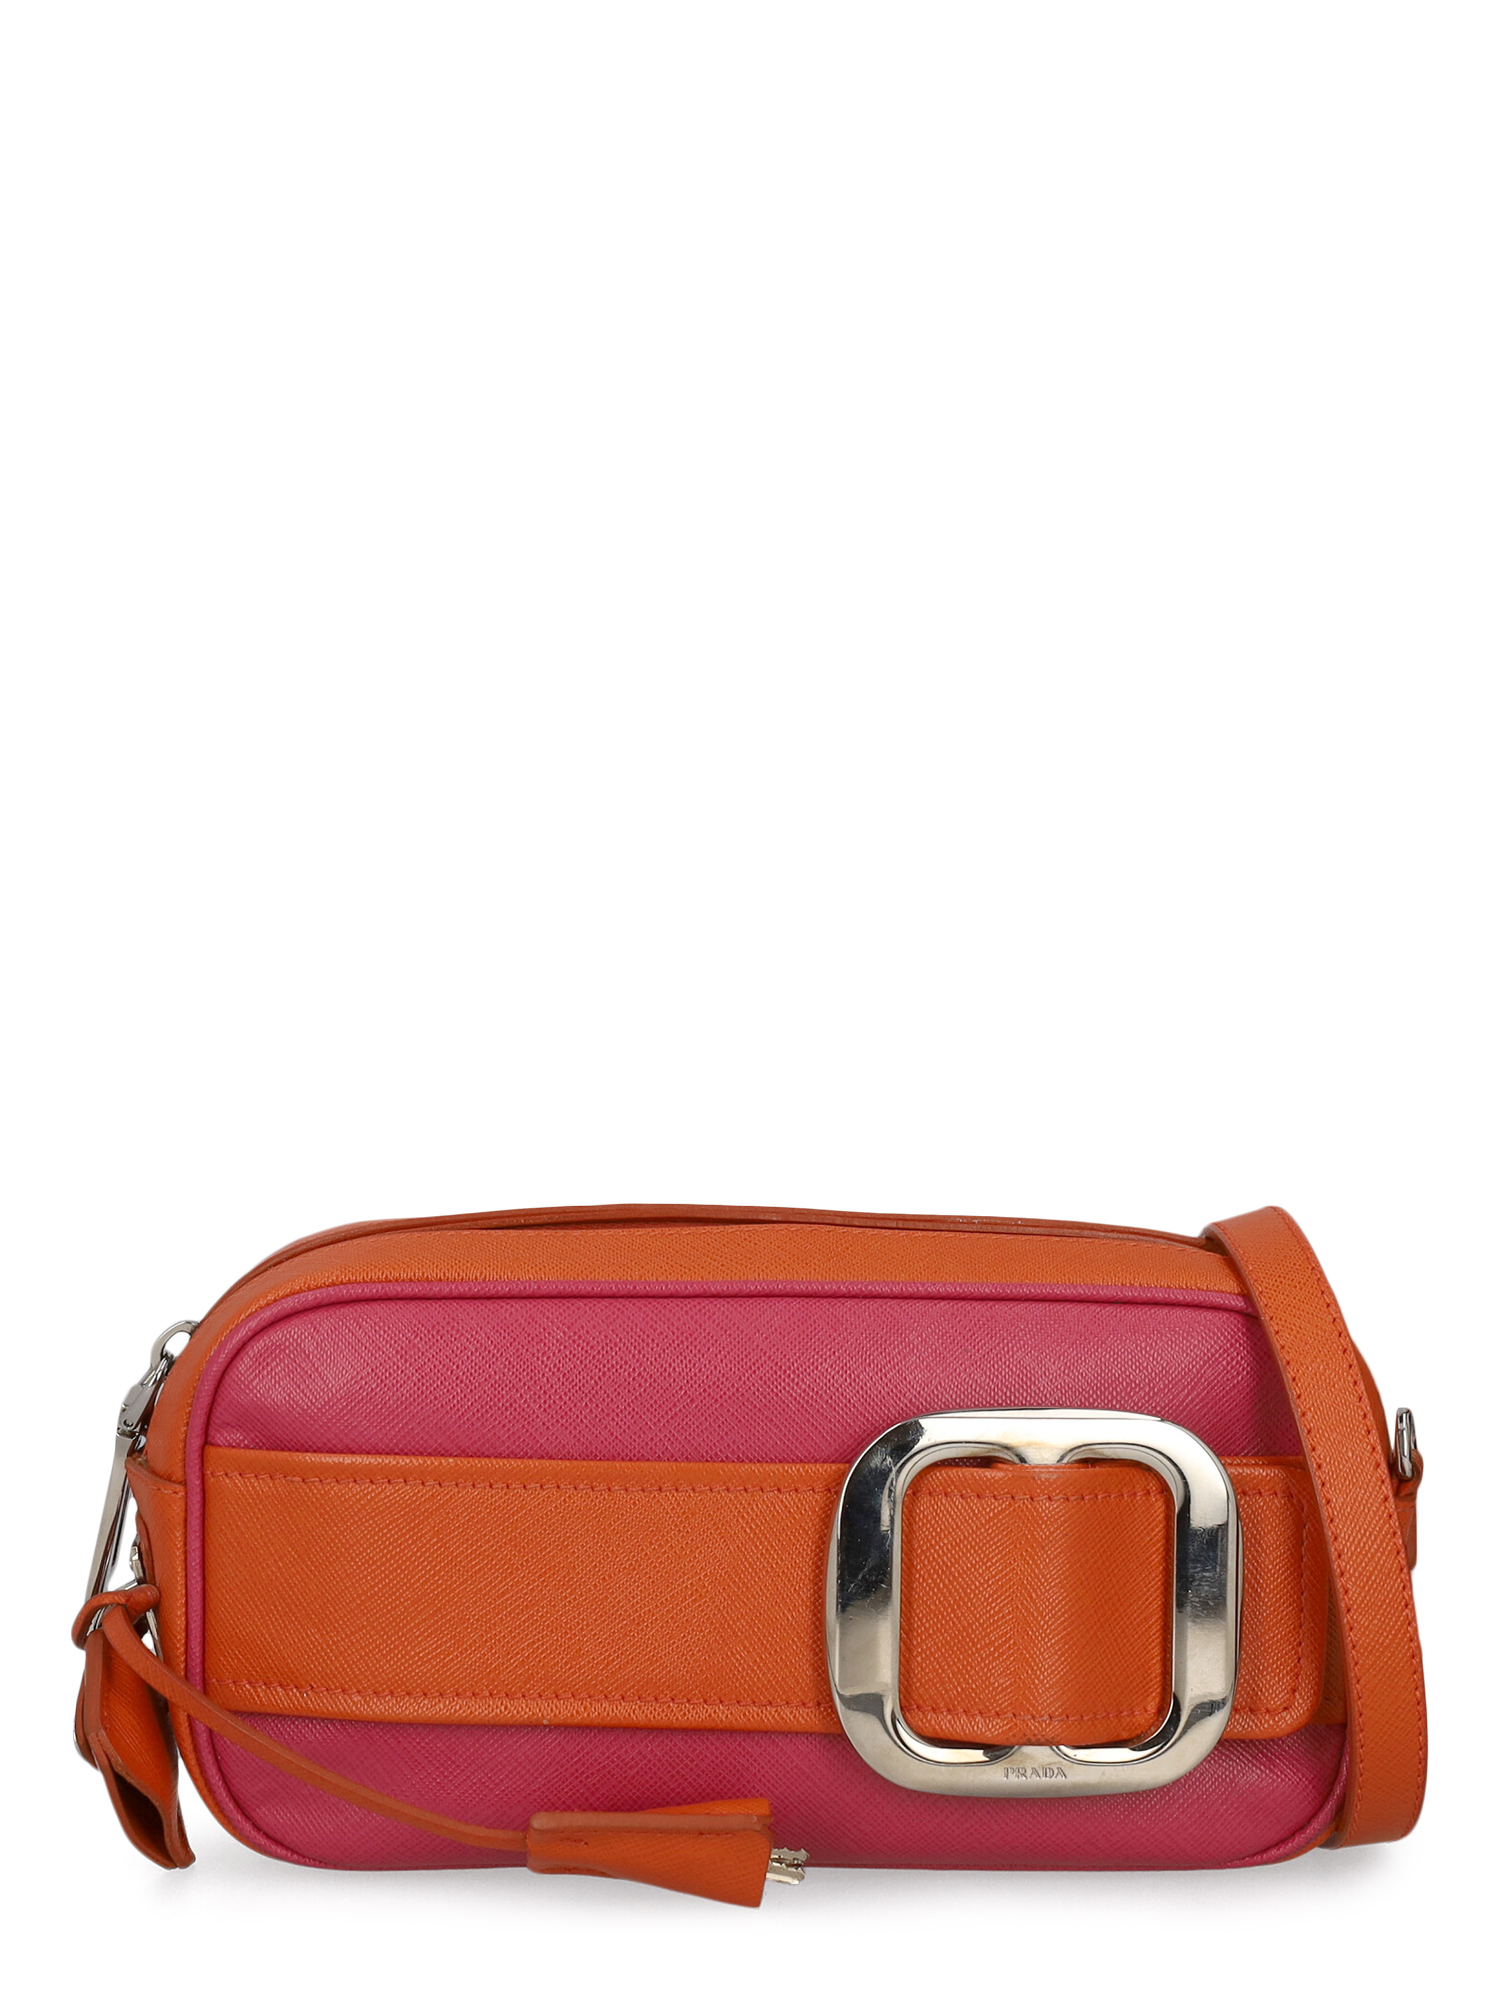 Condition: Good, Solid Color Leather, Color: Orange, Pink -  -  -